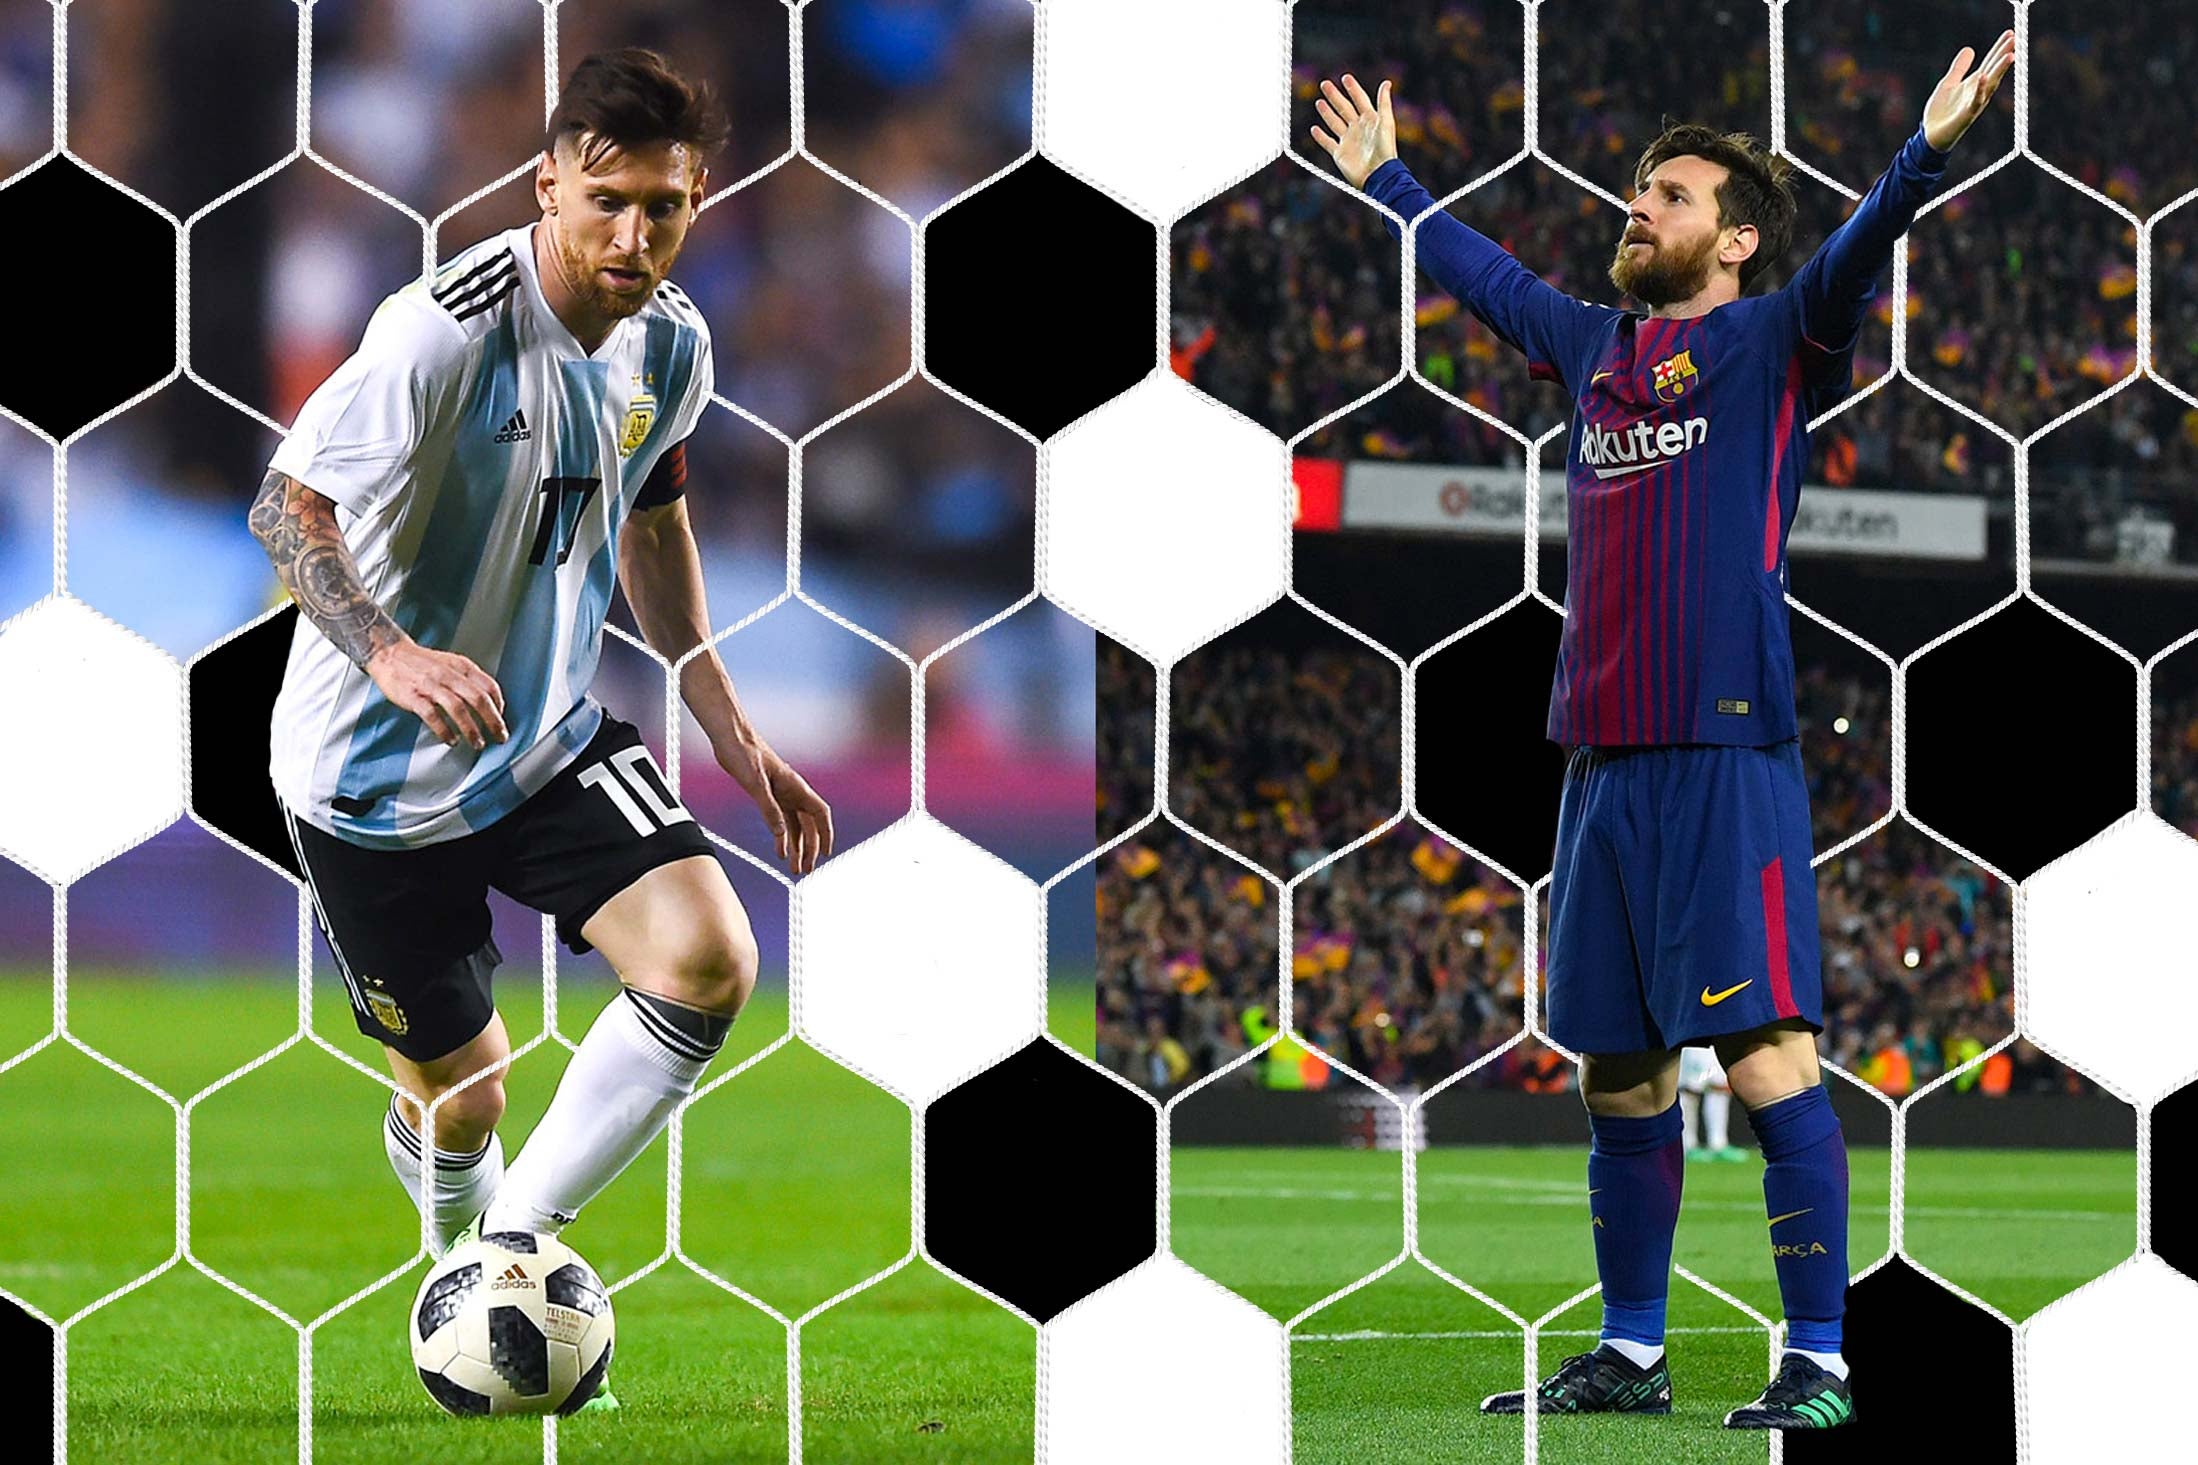 On left, Lionel Messi playing for Argentina. On right, Lionel Messi playing for Barcelona. 